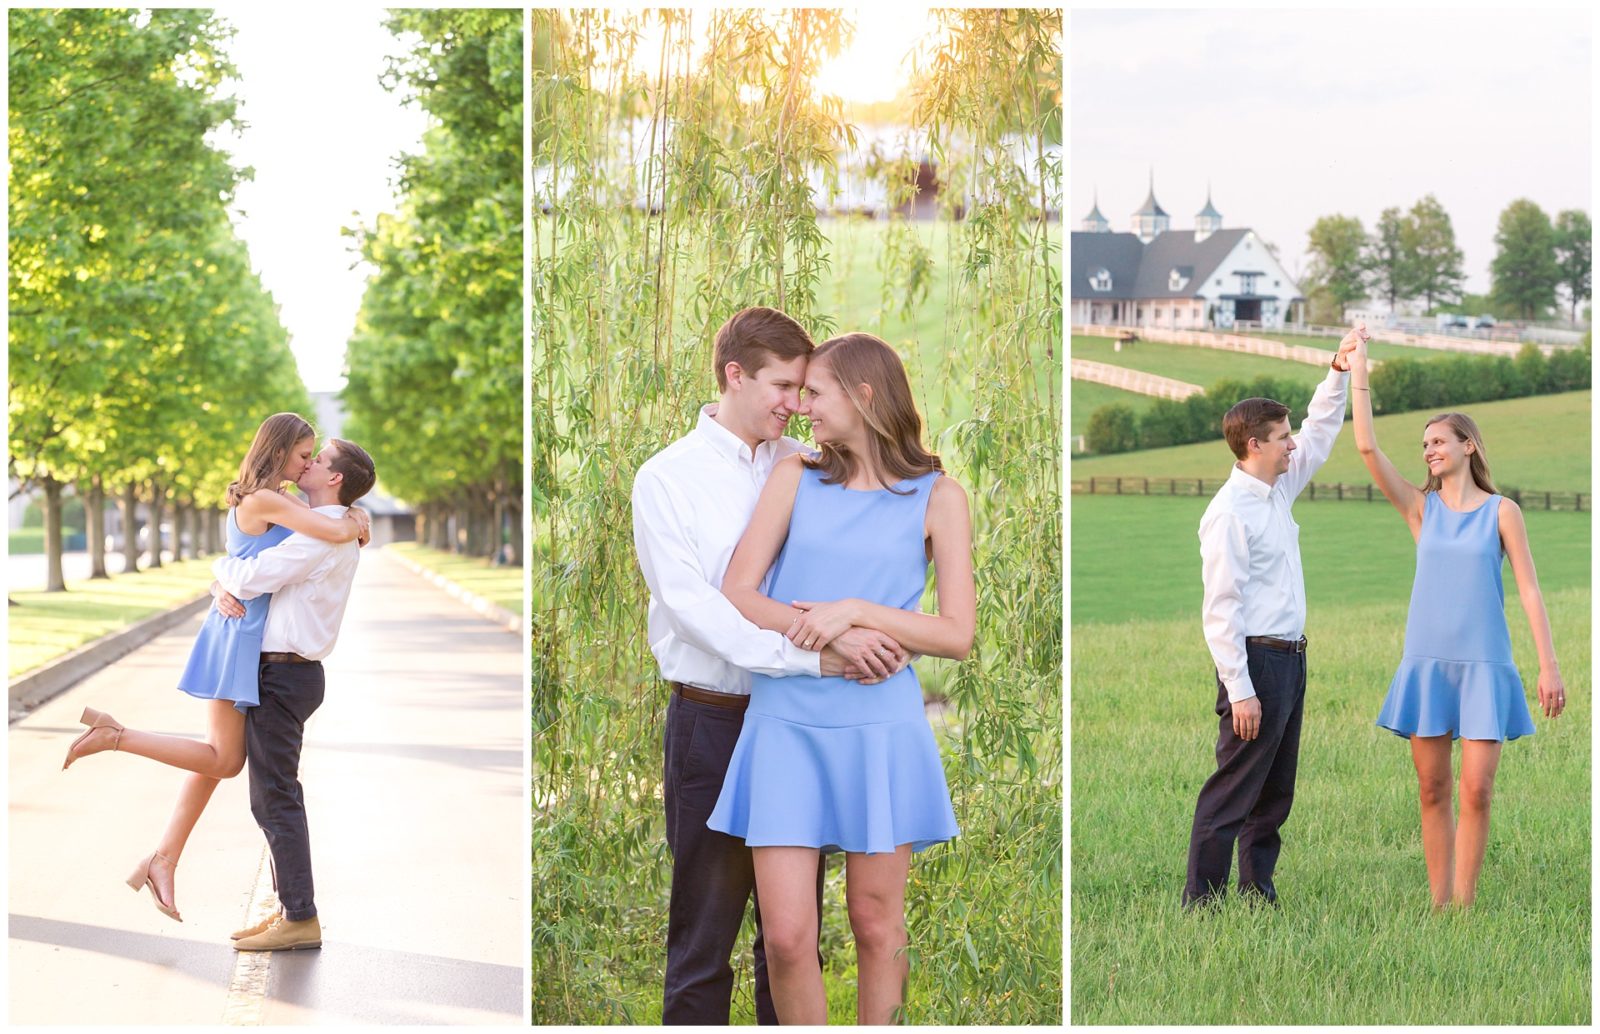 May Engagement Session at Keeneland Racecourse in Lexington, KY